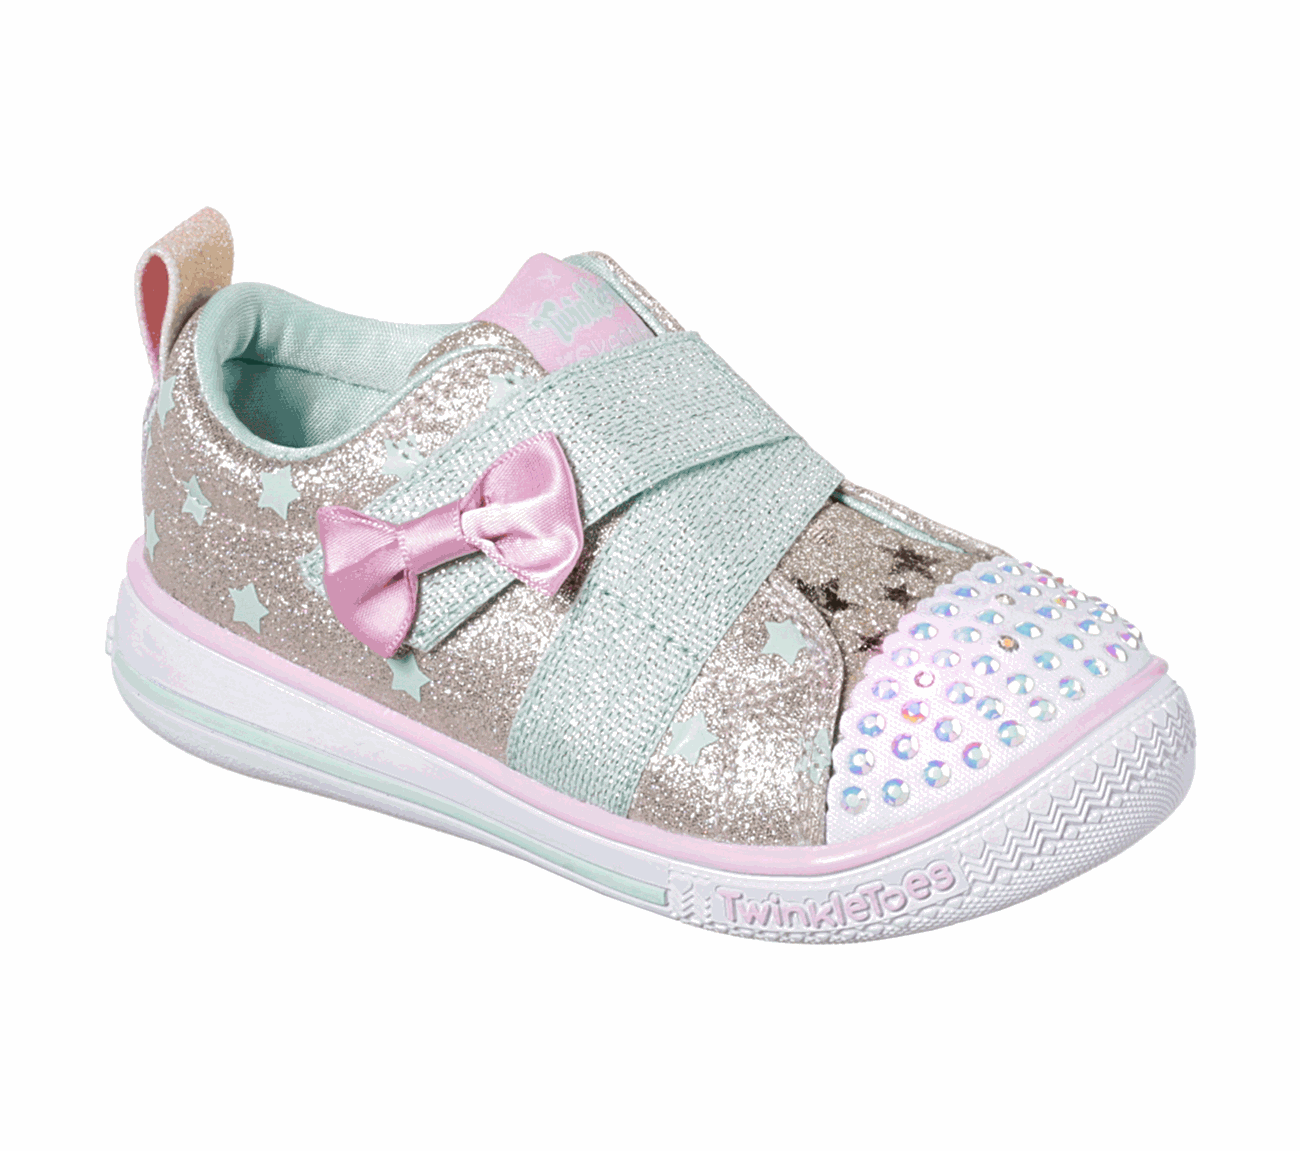 twinkle shoes for adults